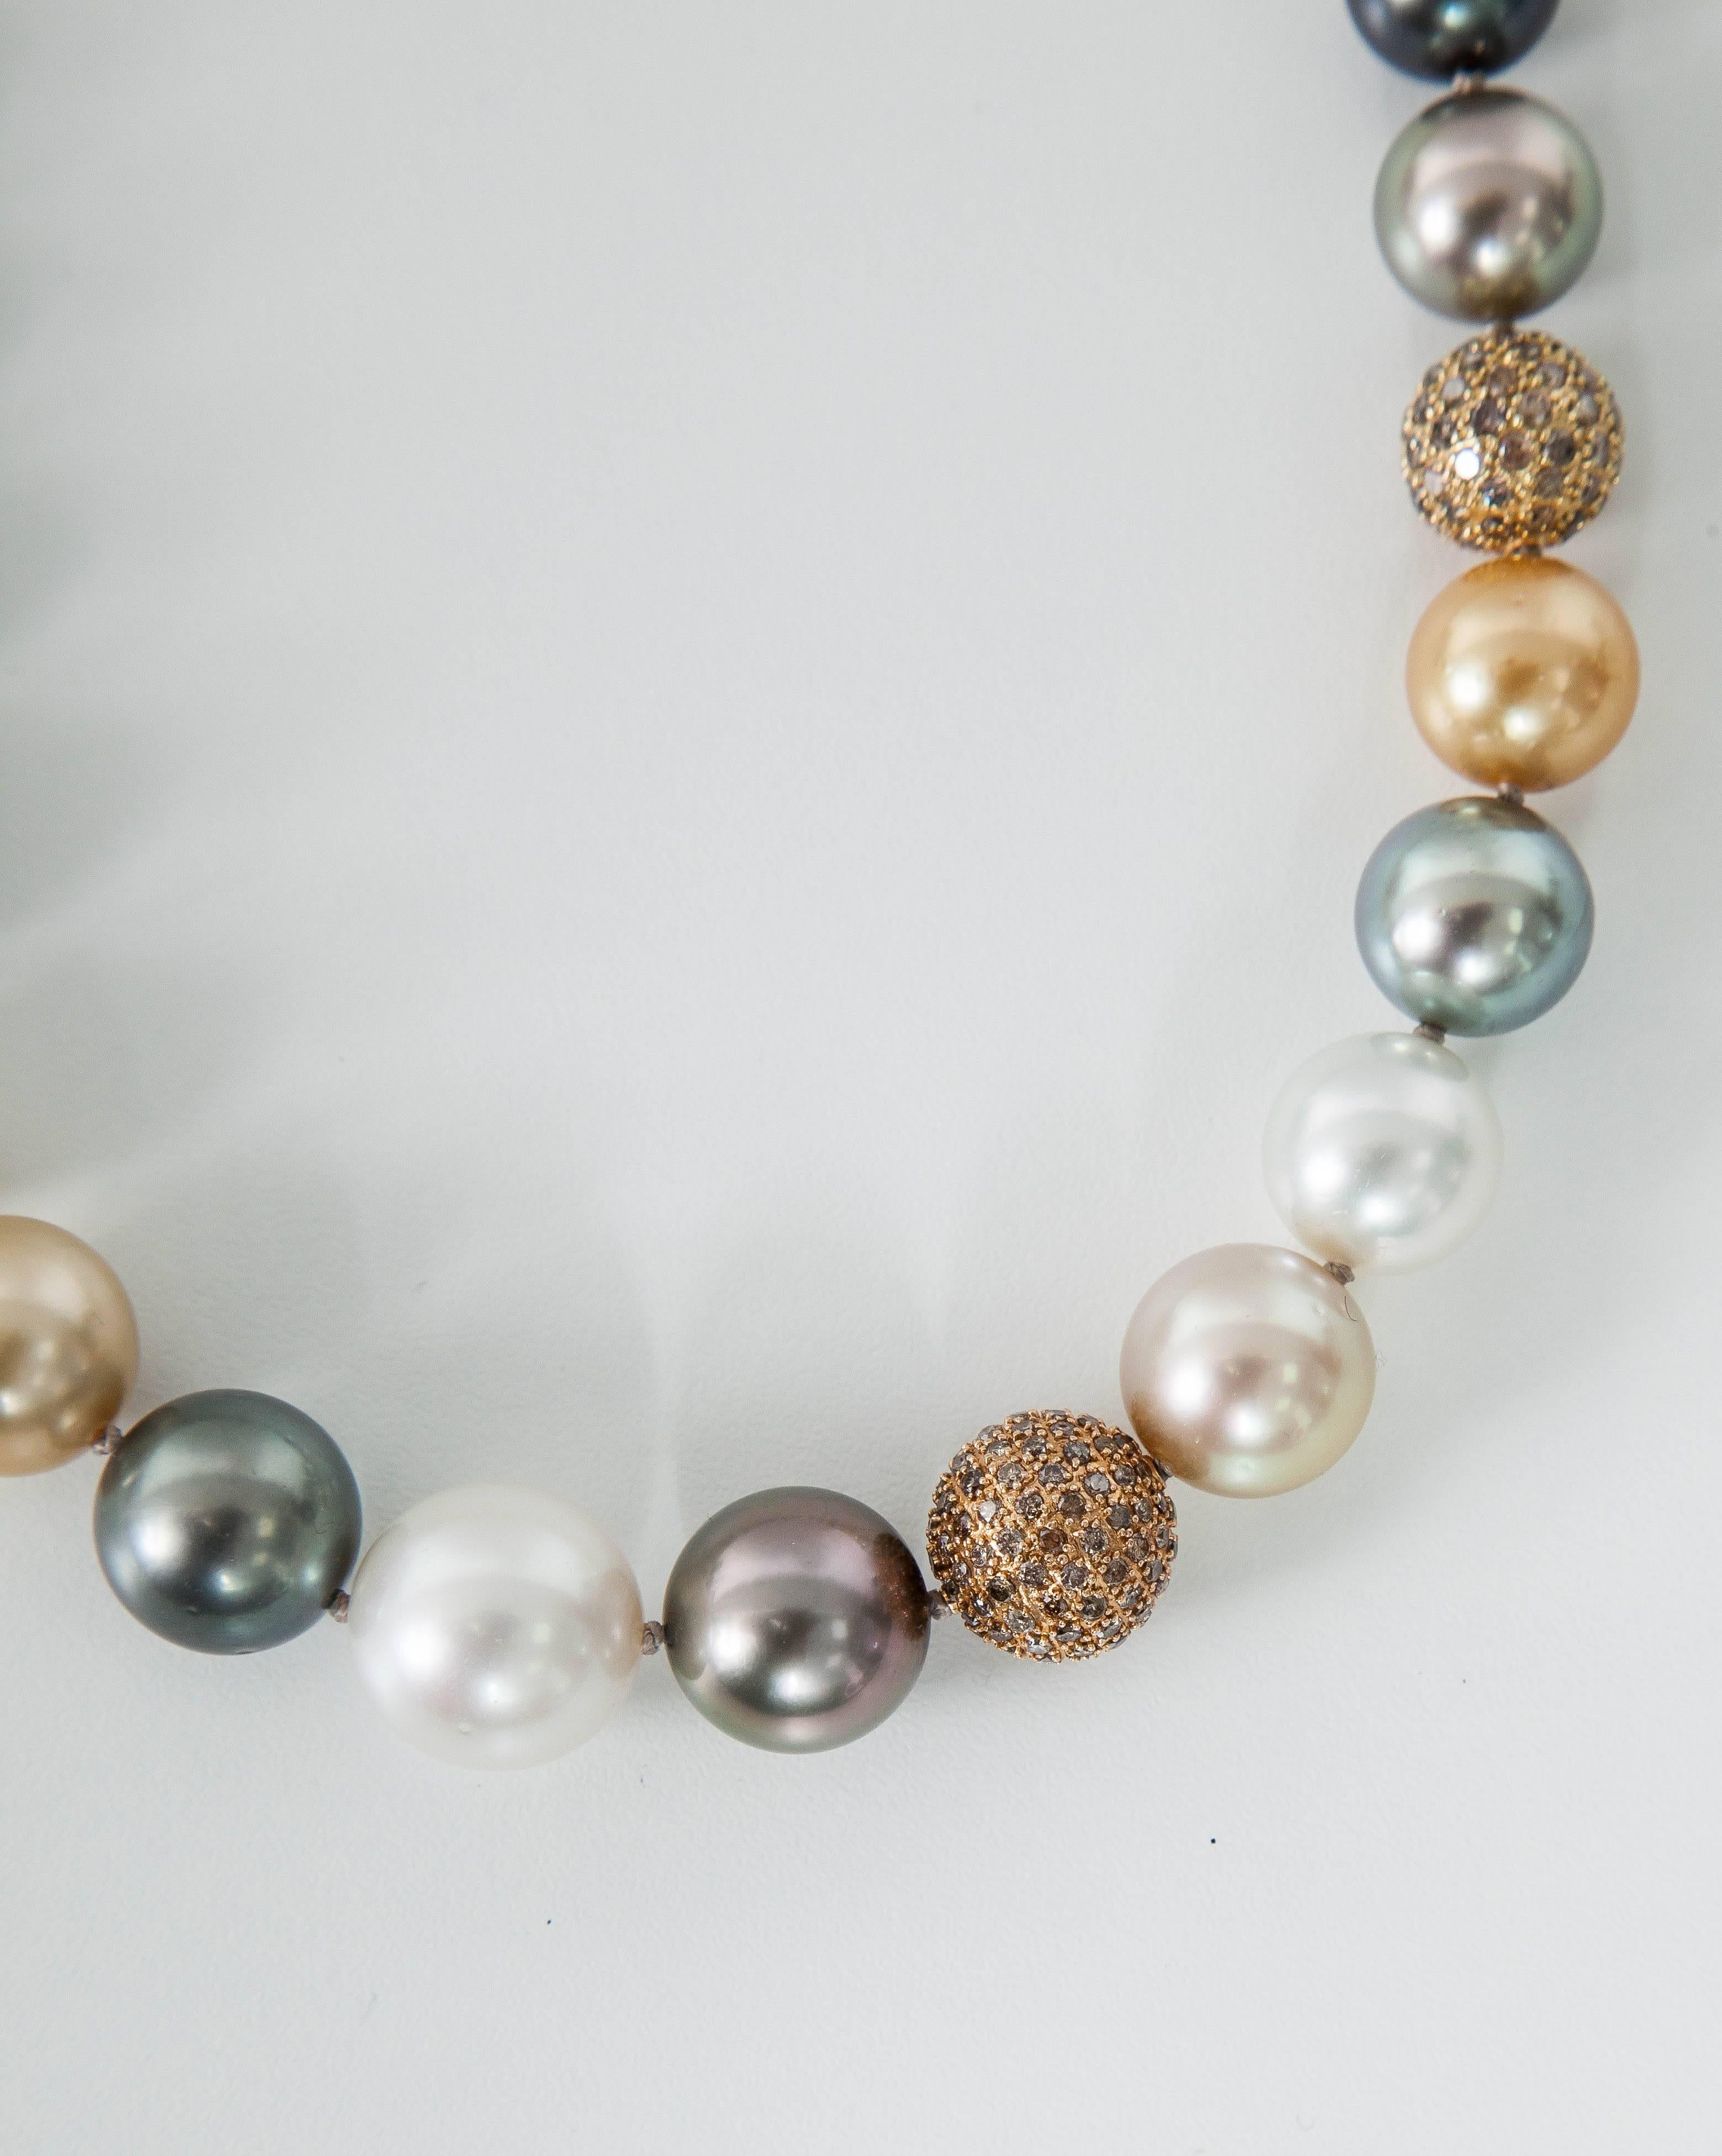 This amazing Necklace feature:
South Sea Cultured Multi color Necklace approximate size 10.5mm to 14.5mm
Pearl Count: 32pcs.
Pearl Quality: AA
Pearl Luster: AA
Diamond Balls: 7 cts
The Origin of the pearls are: Australia,Indonesia,Tahiti